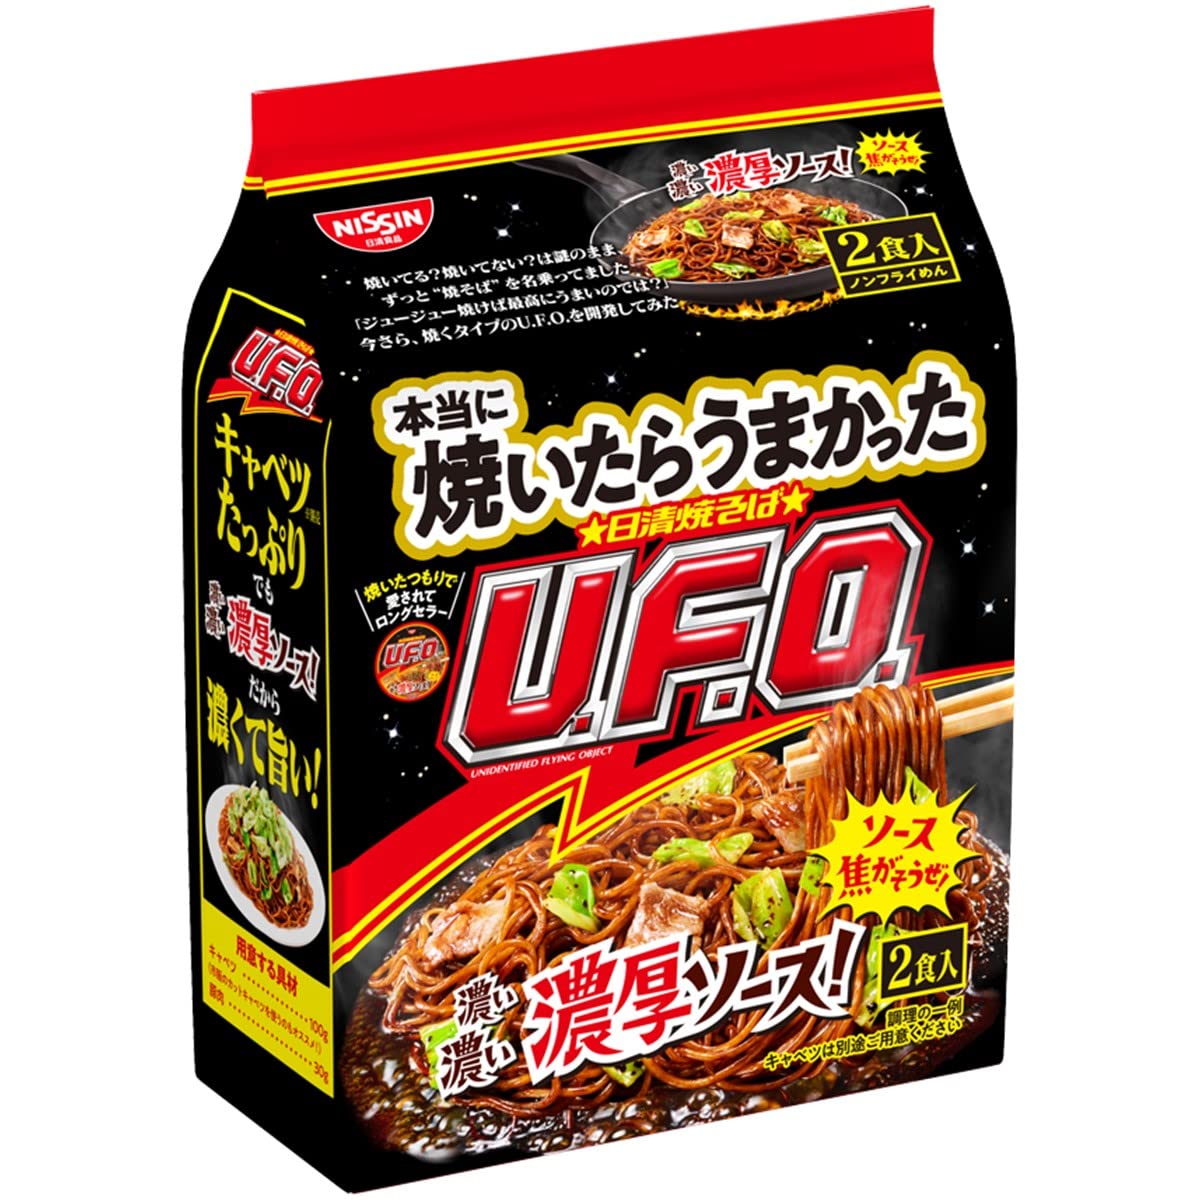 Yakisoba U.F.O Multipack(2 Pacchetti) Really Delicious When Baked 210g, Nissin